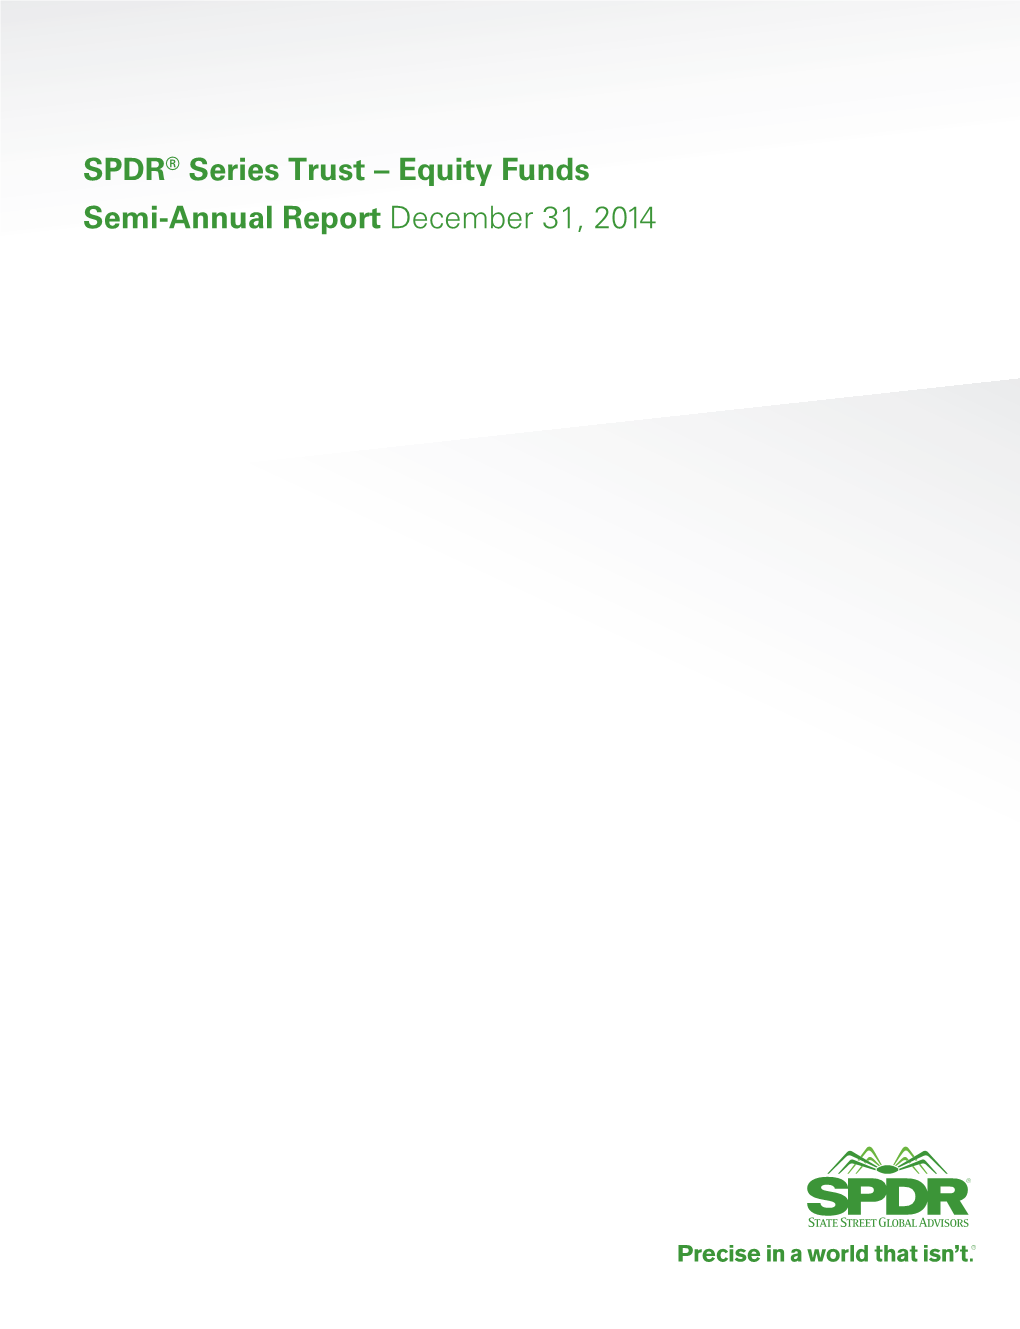 SPDR® Series Trust – Equity Funds Semi-Annual Report December 31, 2014 TABLE of CONTENTS